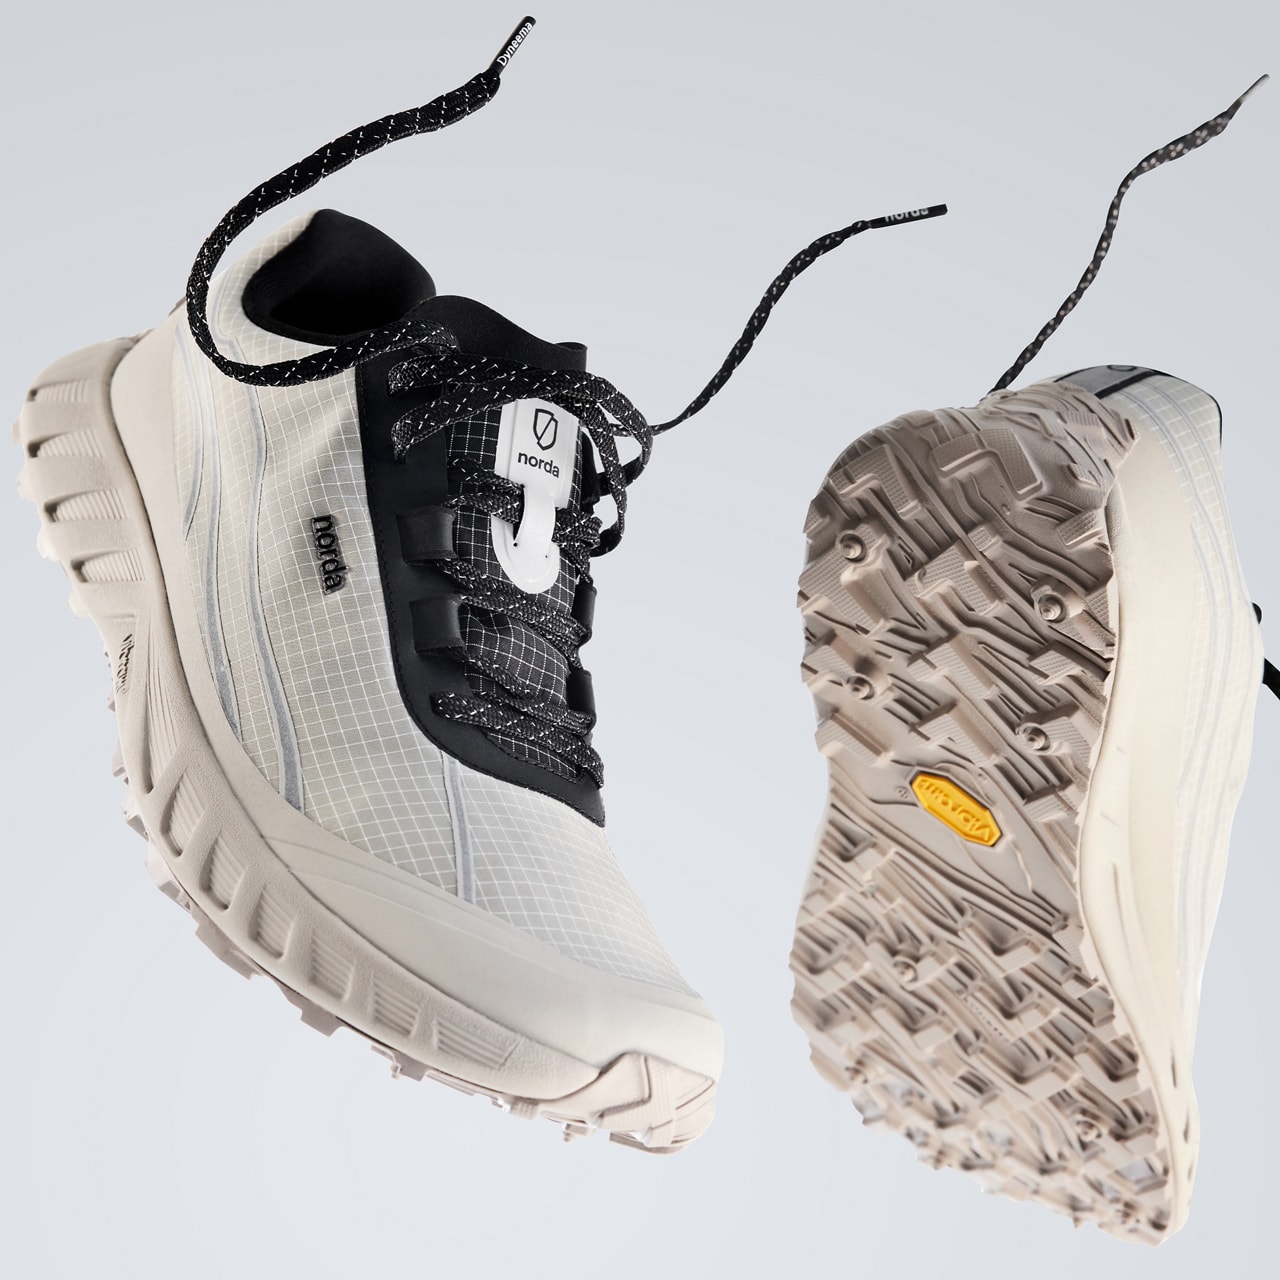 norda running trail shoes 002 003 cinder pack sneakers vibram dyneema official release date info photos price store list buying guide